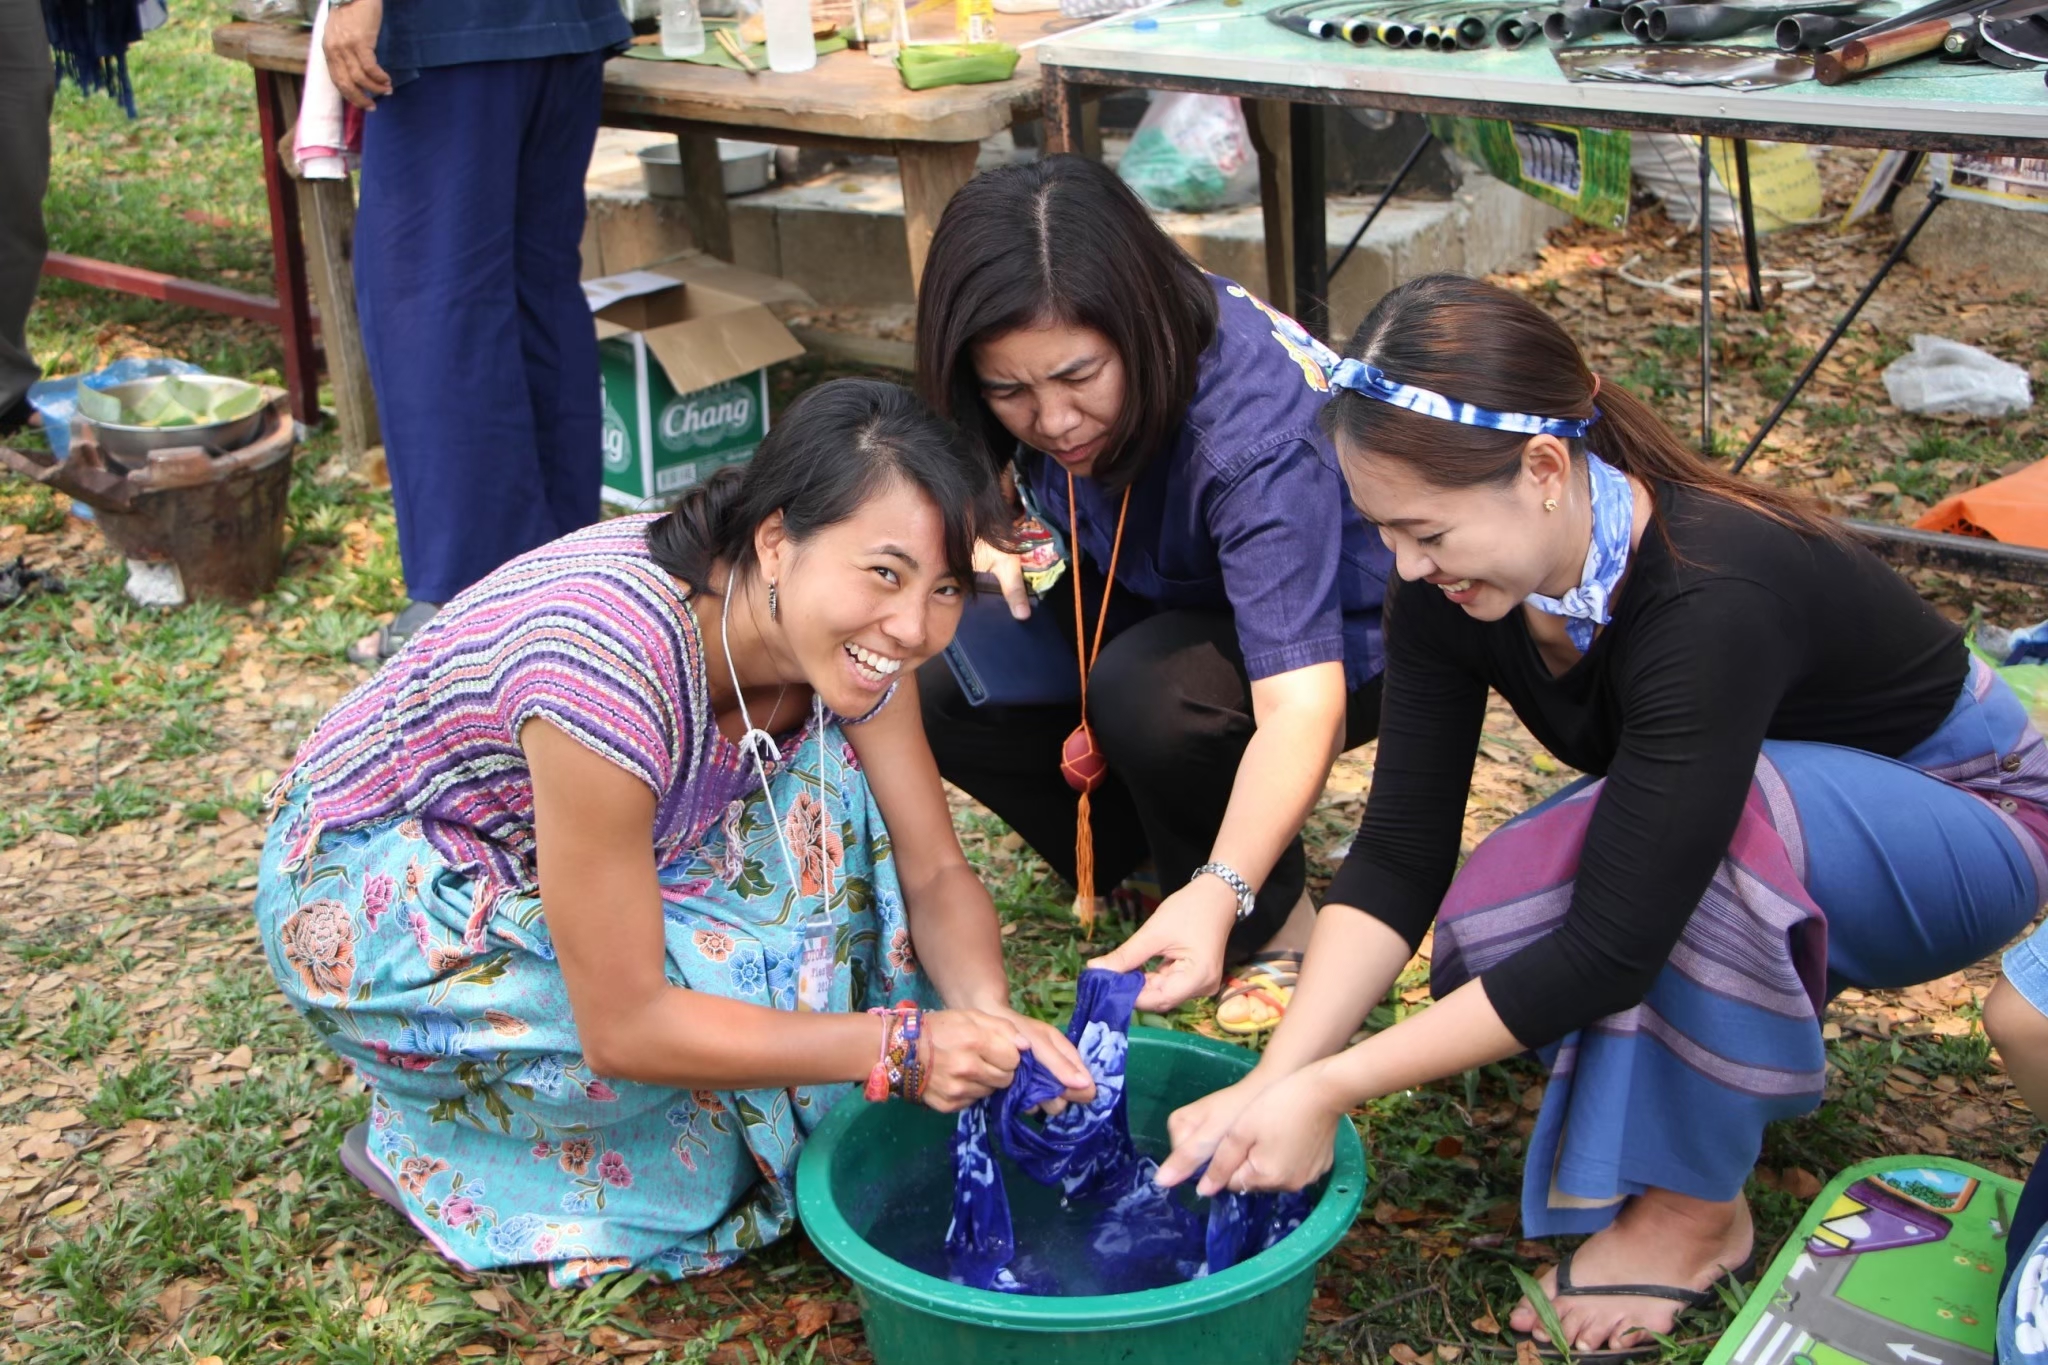 Three woman gather around a bucket filled with water, squeezing water out of fabric. The woman on the left smiles at the camera, while the woman in the center and the woman on the right are focused on their task. They are outside on the grass. 